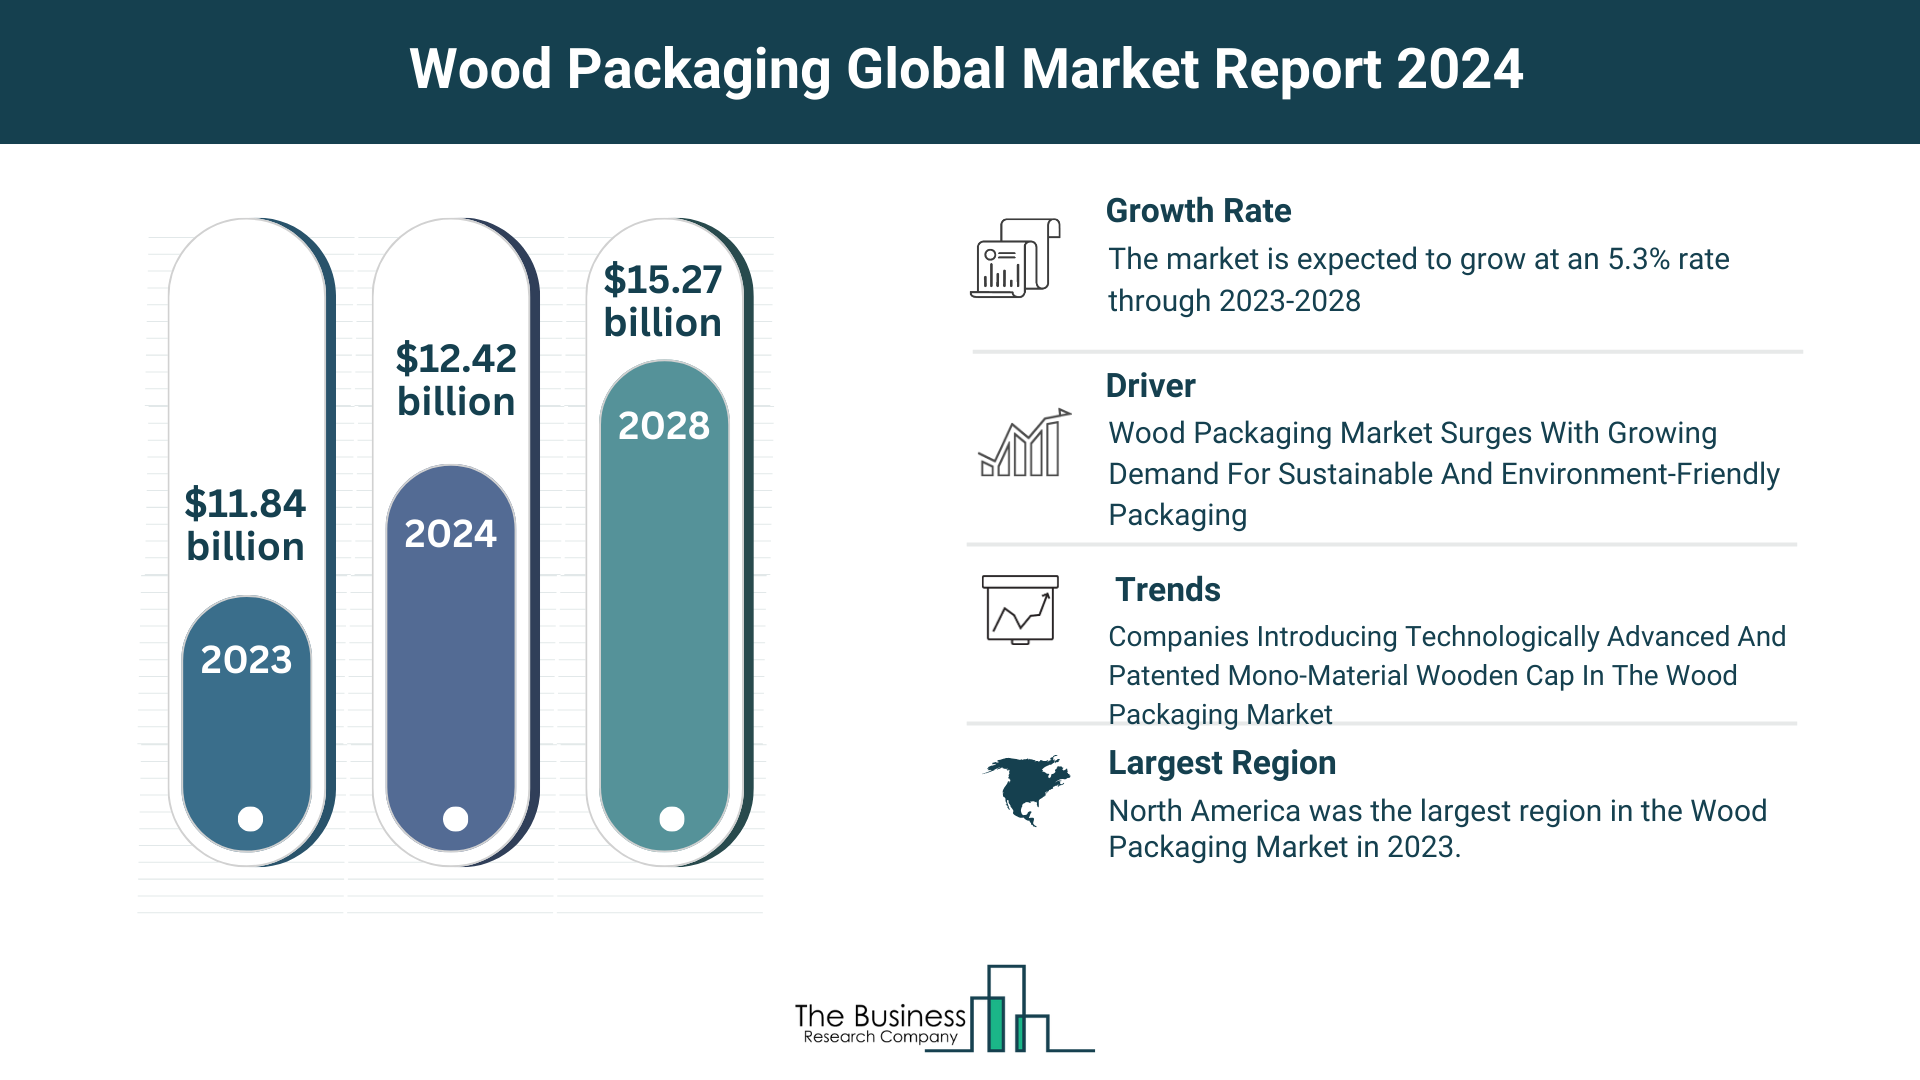 Global Wood Packaging Market Analysis: Size, Drivers, Trends, Opportunities And Strategies